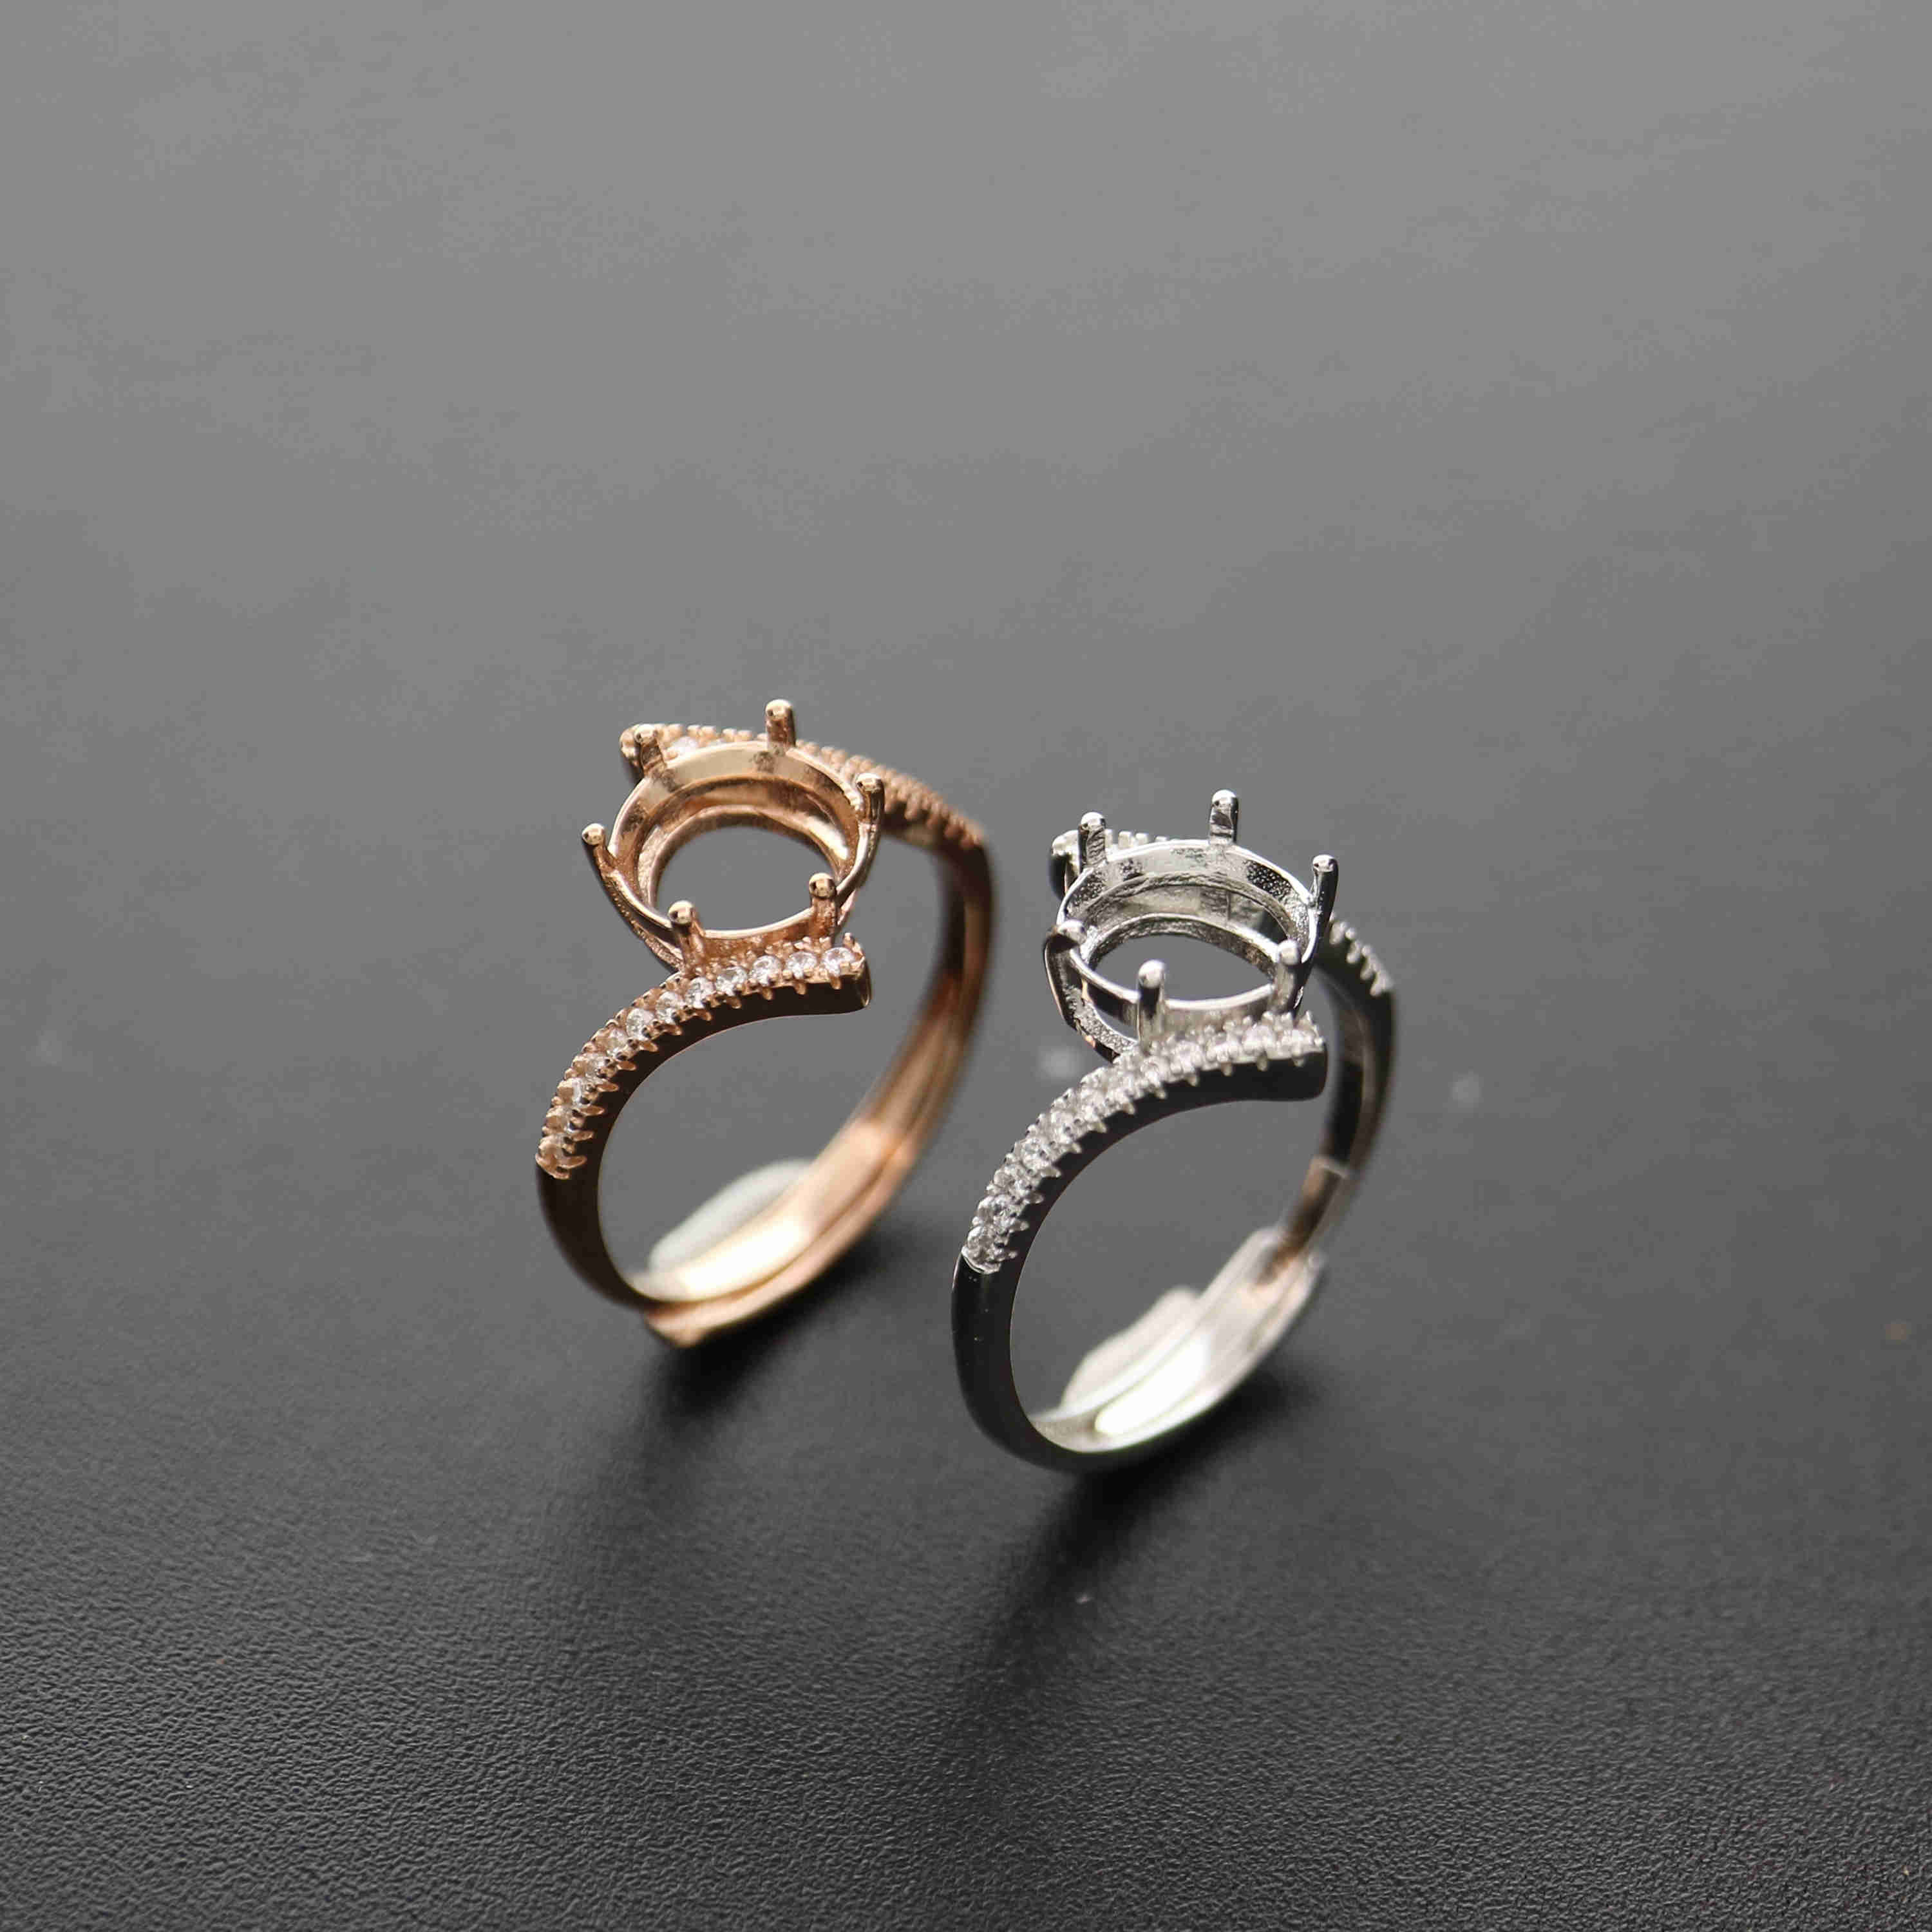 1Pcs 7/8MM Round Simple Rose Gold Silver Gems Cz Stone Prong Bezel Solid 925 Sterling Silver Adjustable Ring Settings 1210035 - Click Image to Close